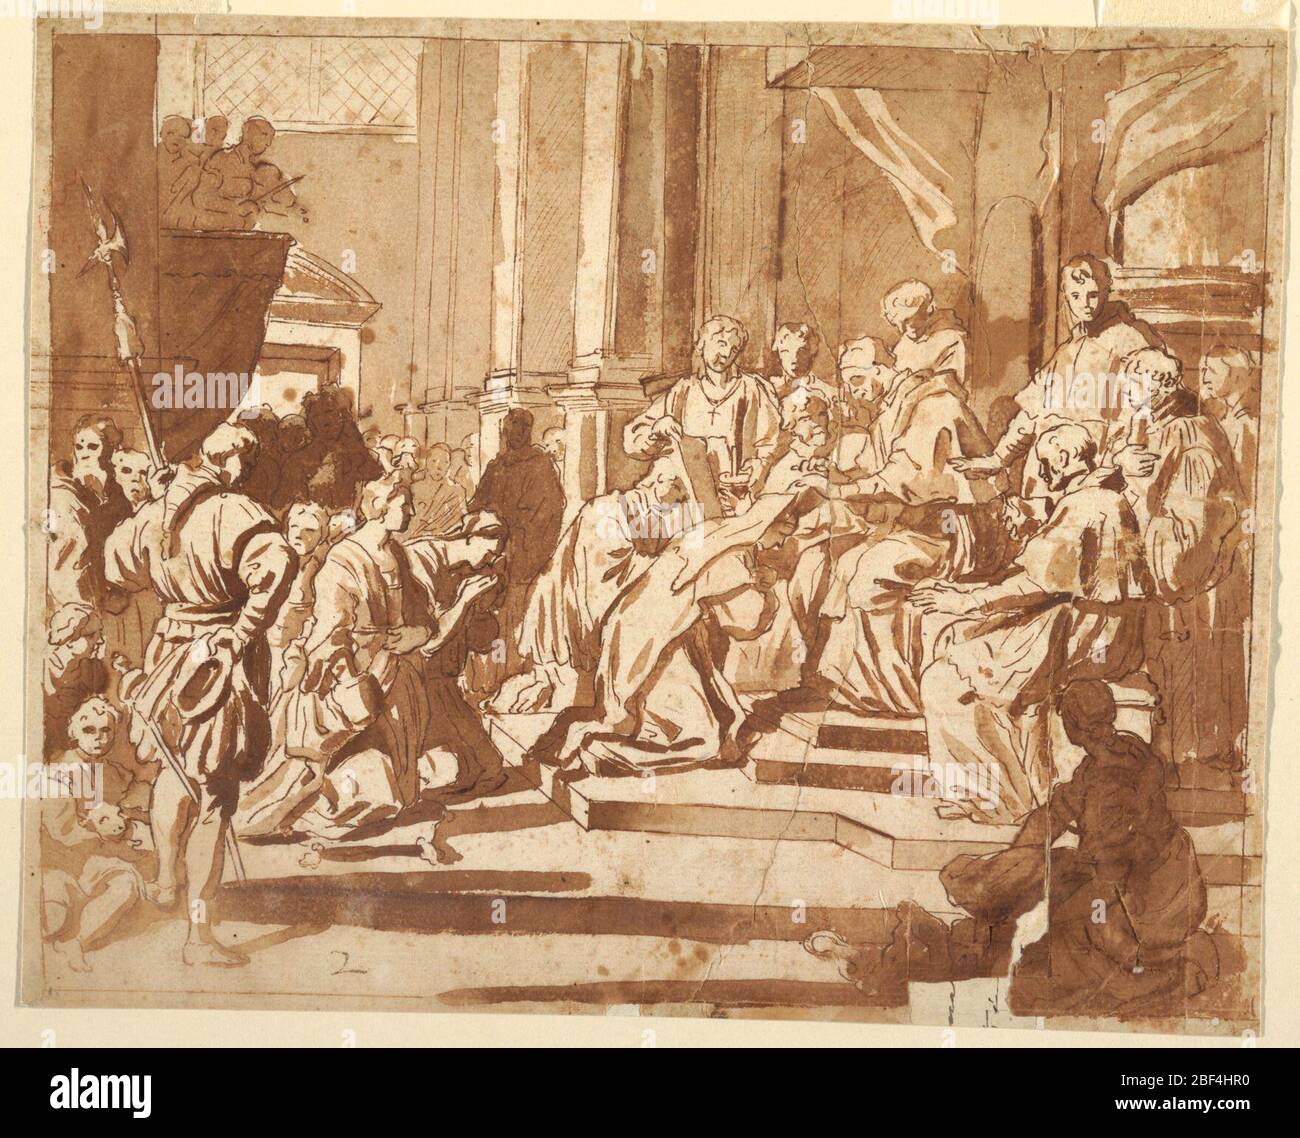 Clement XI Vesting His Niece as Nun. Drawing of Pope Clemente XI, seated at center right, while he raises his hands and vests his niece as a nun. Stock Photo